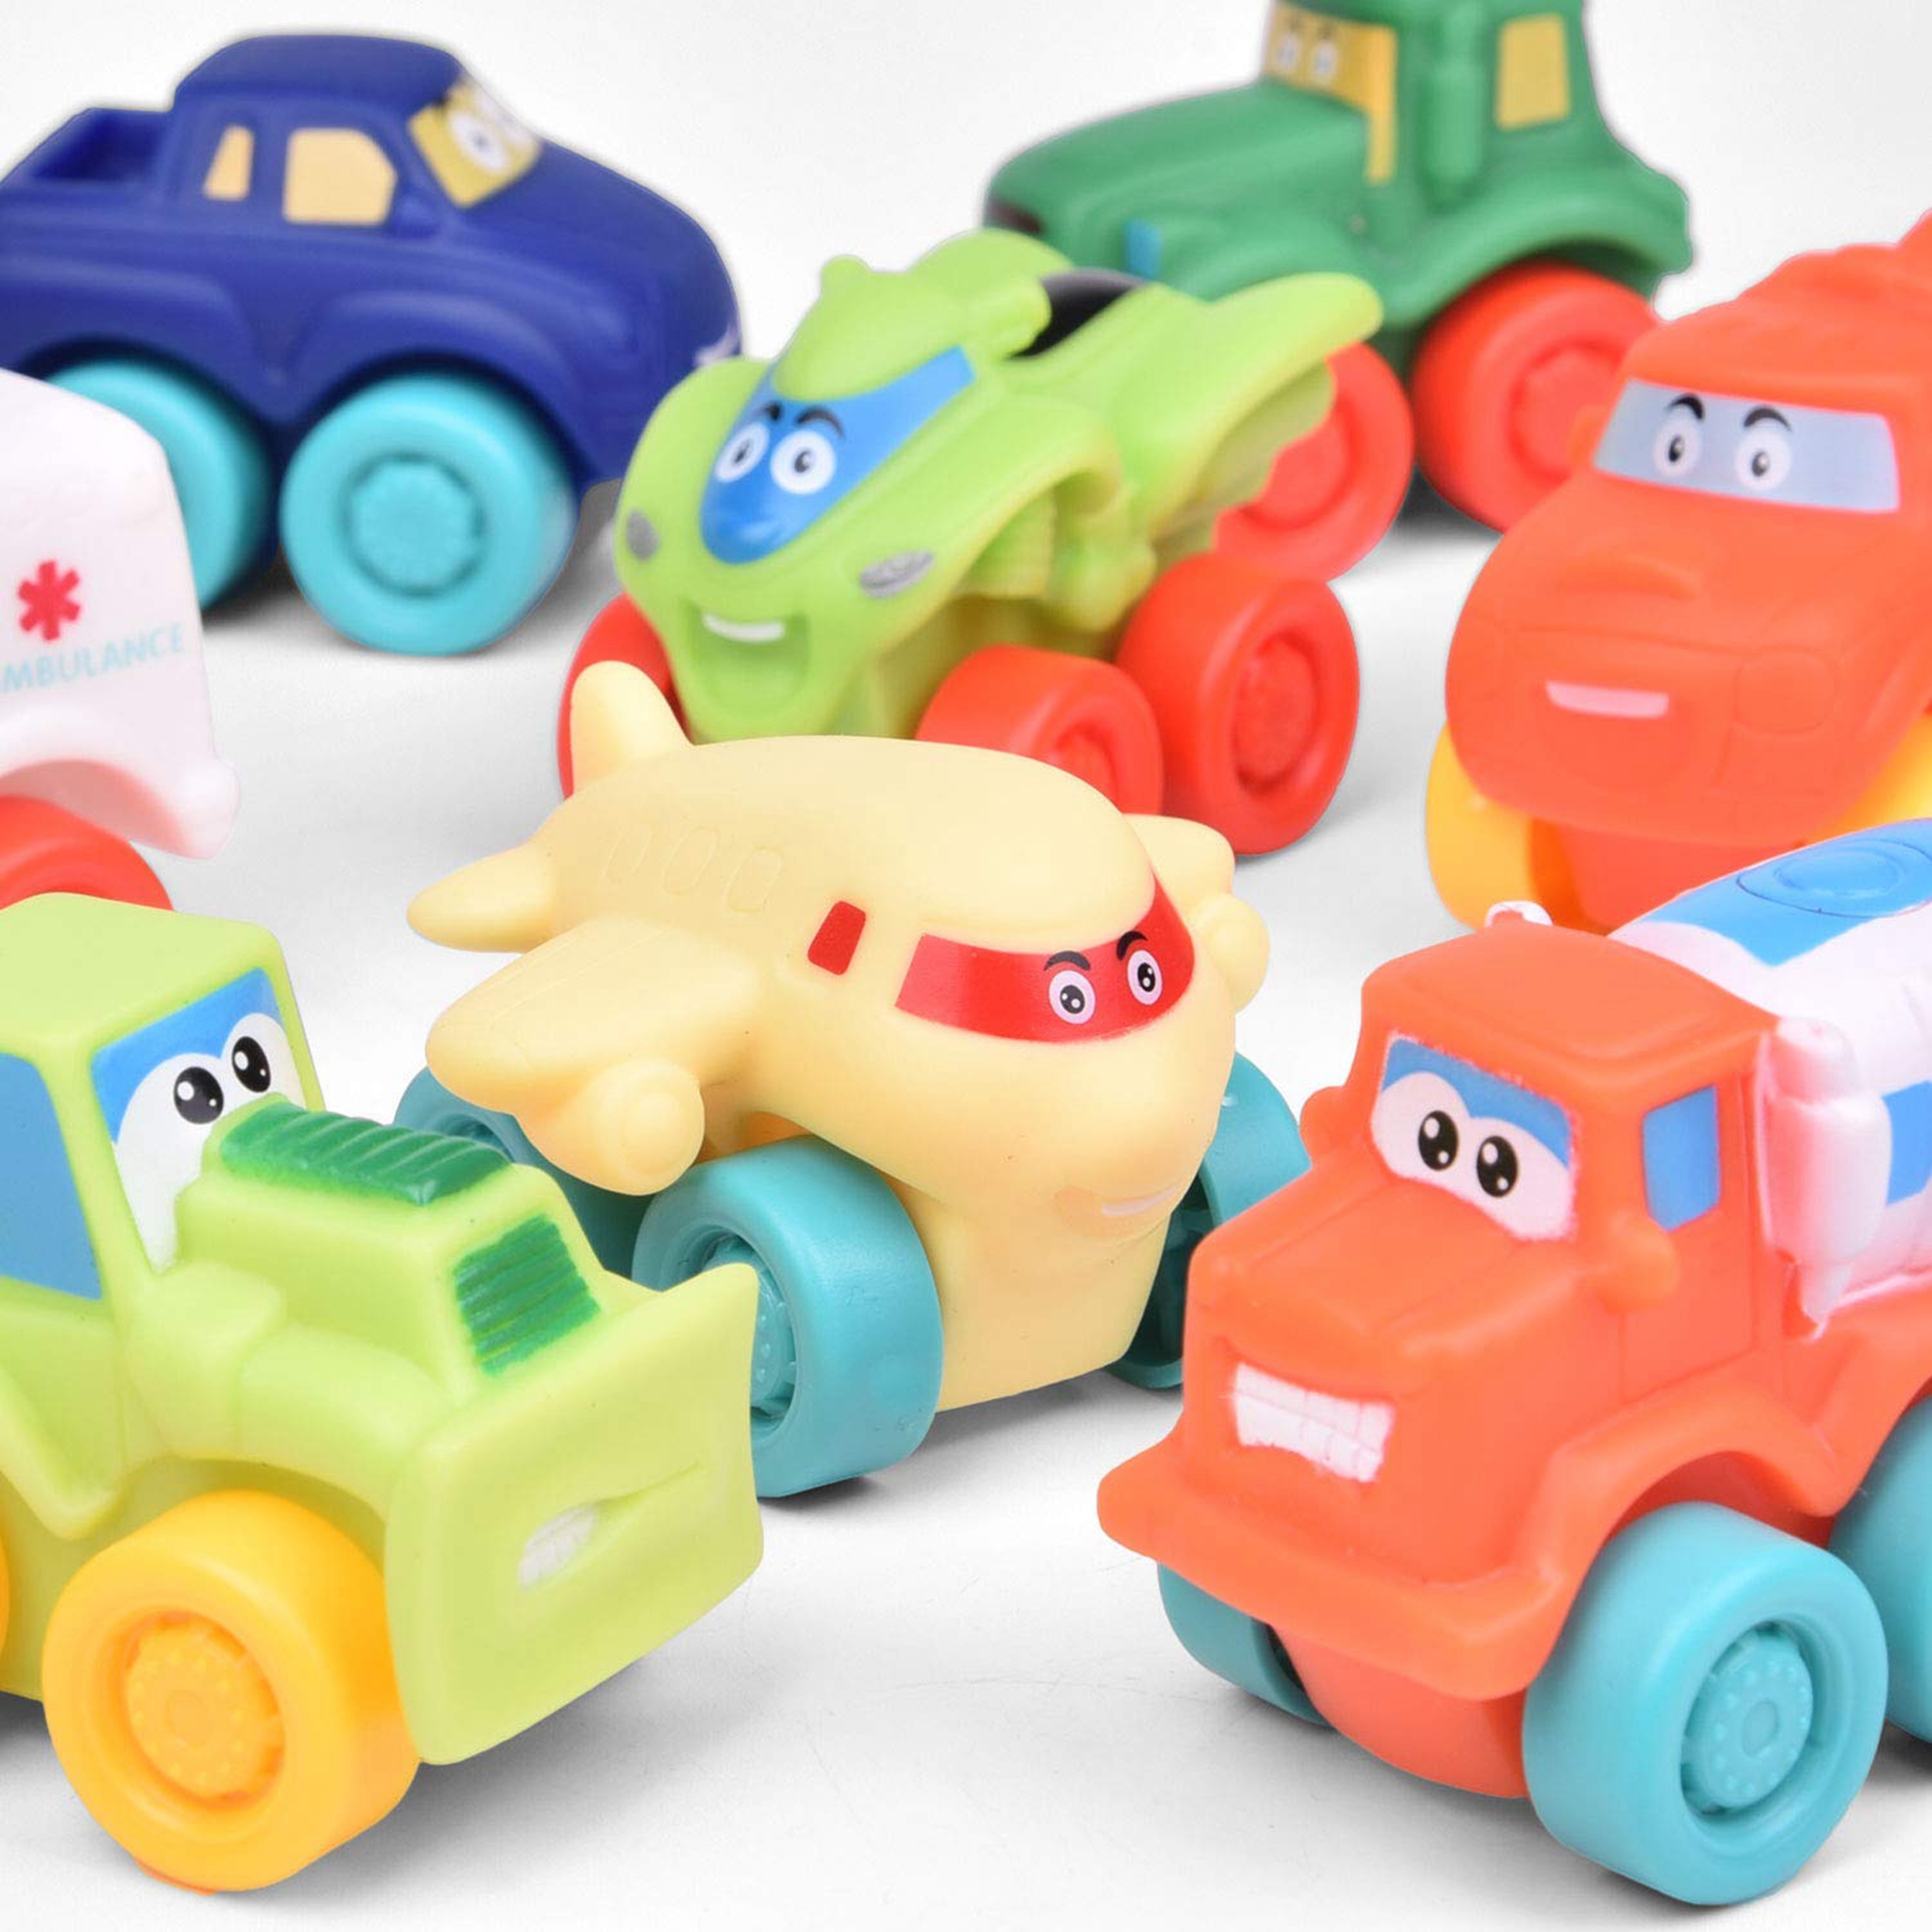 18 Pcs Easter Eggs Prefilled with Baby Cars for Easter Basket Stuffers, Soft Rubber Toy Vehicles for Baby Easter Gifts F-551 - image 1 of 4